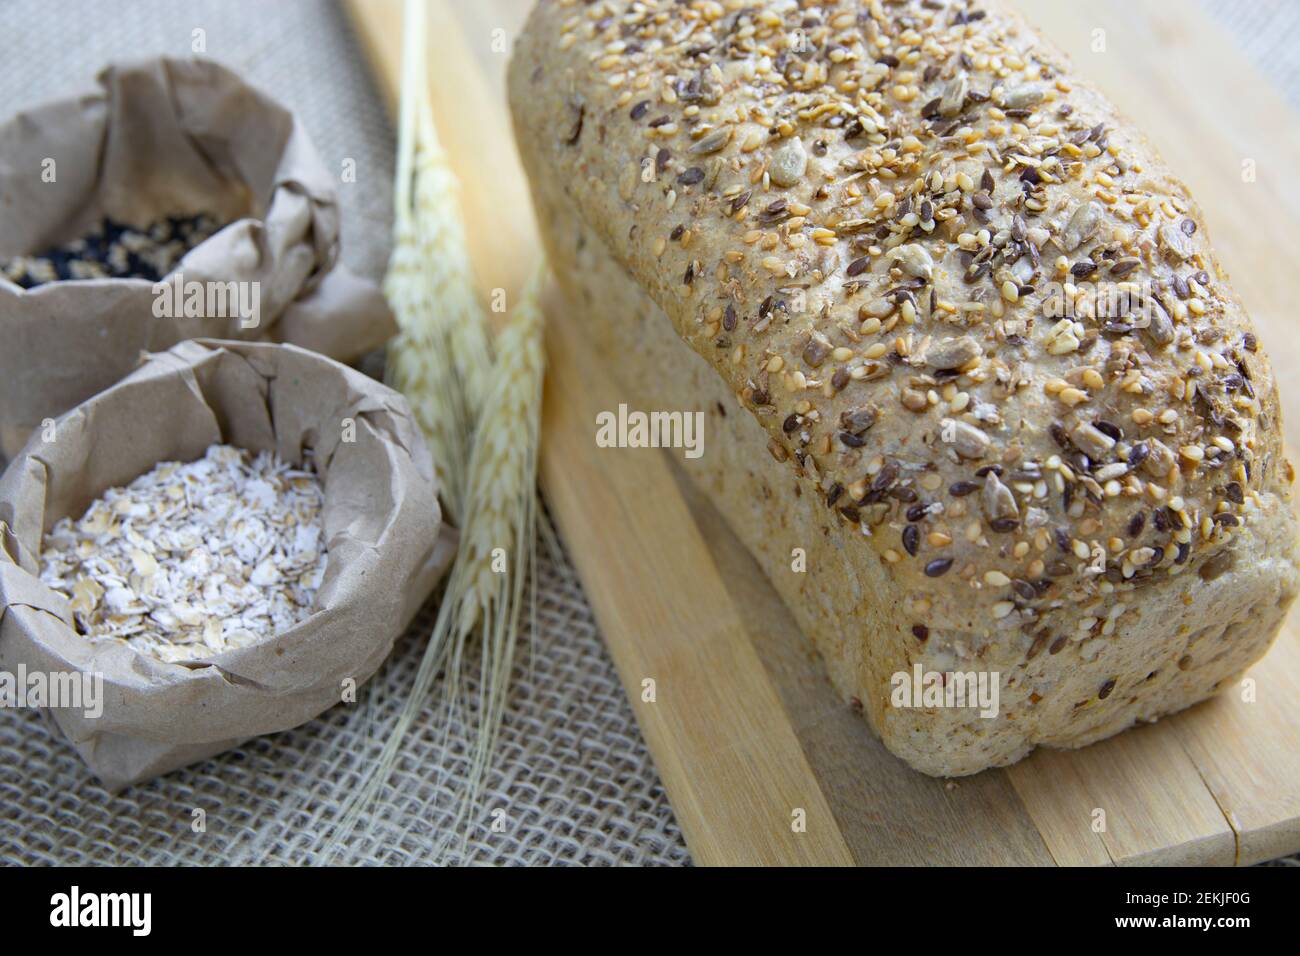 Plain bread with ingredients over wood background. Stock Photo